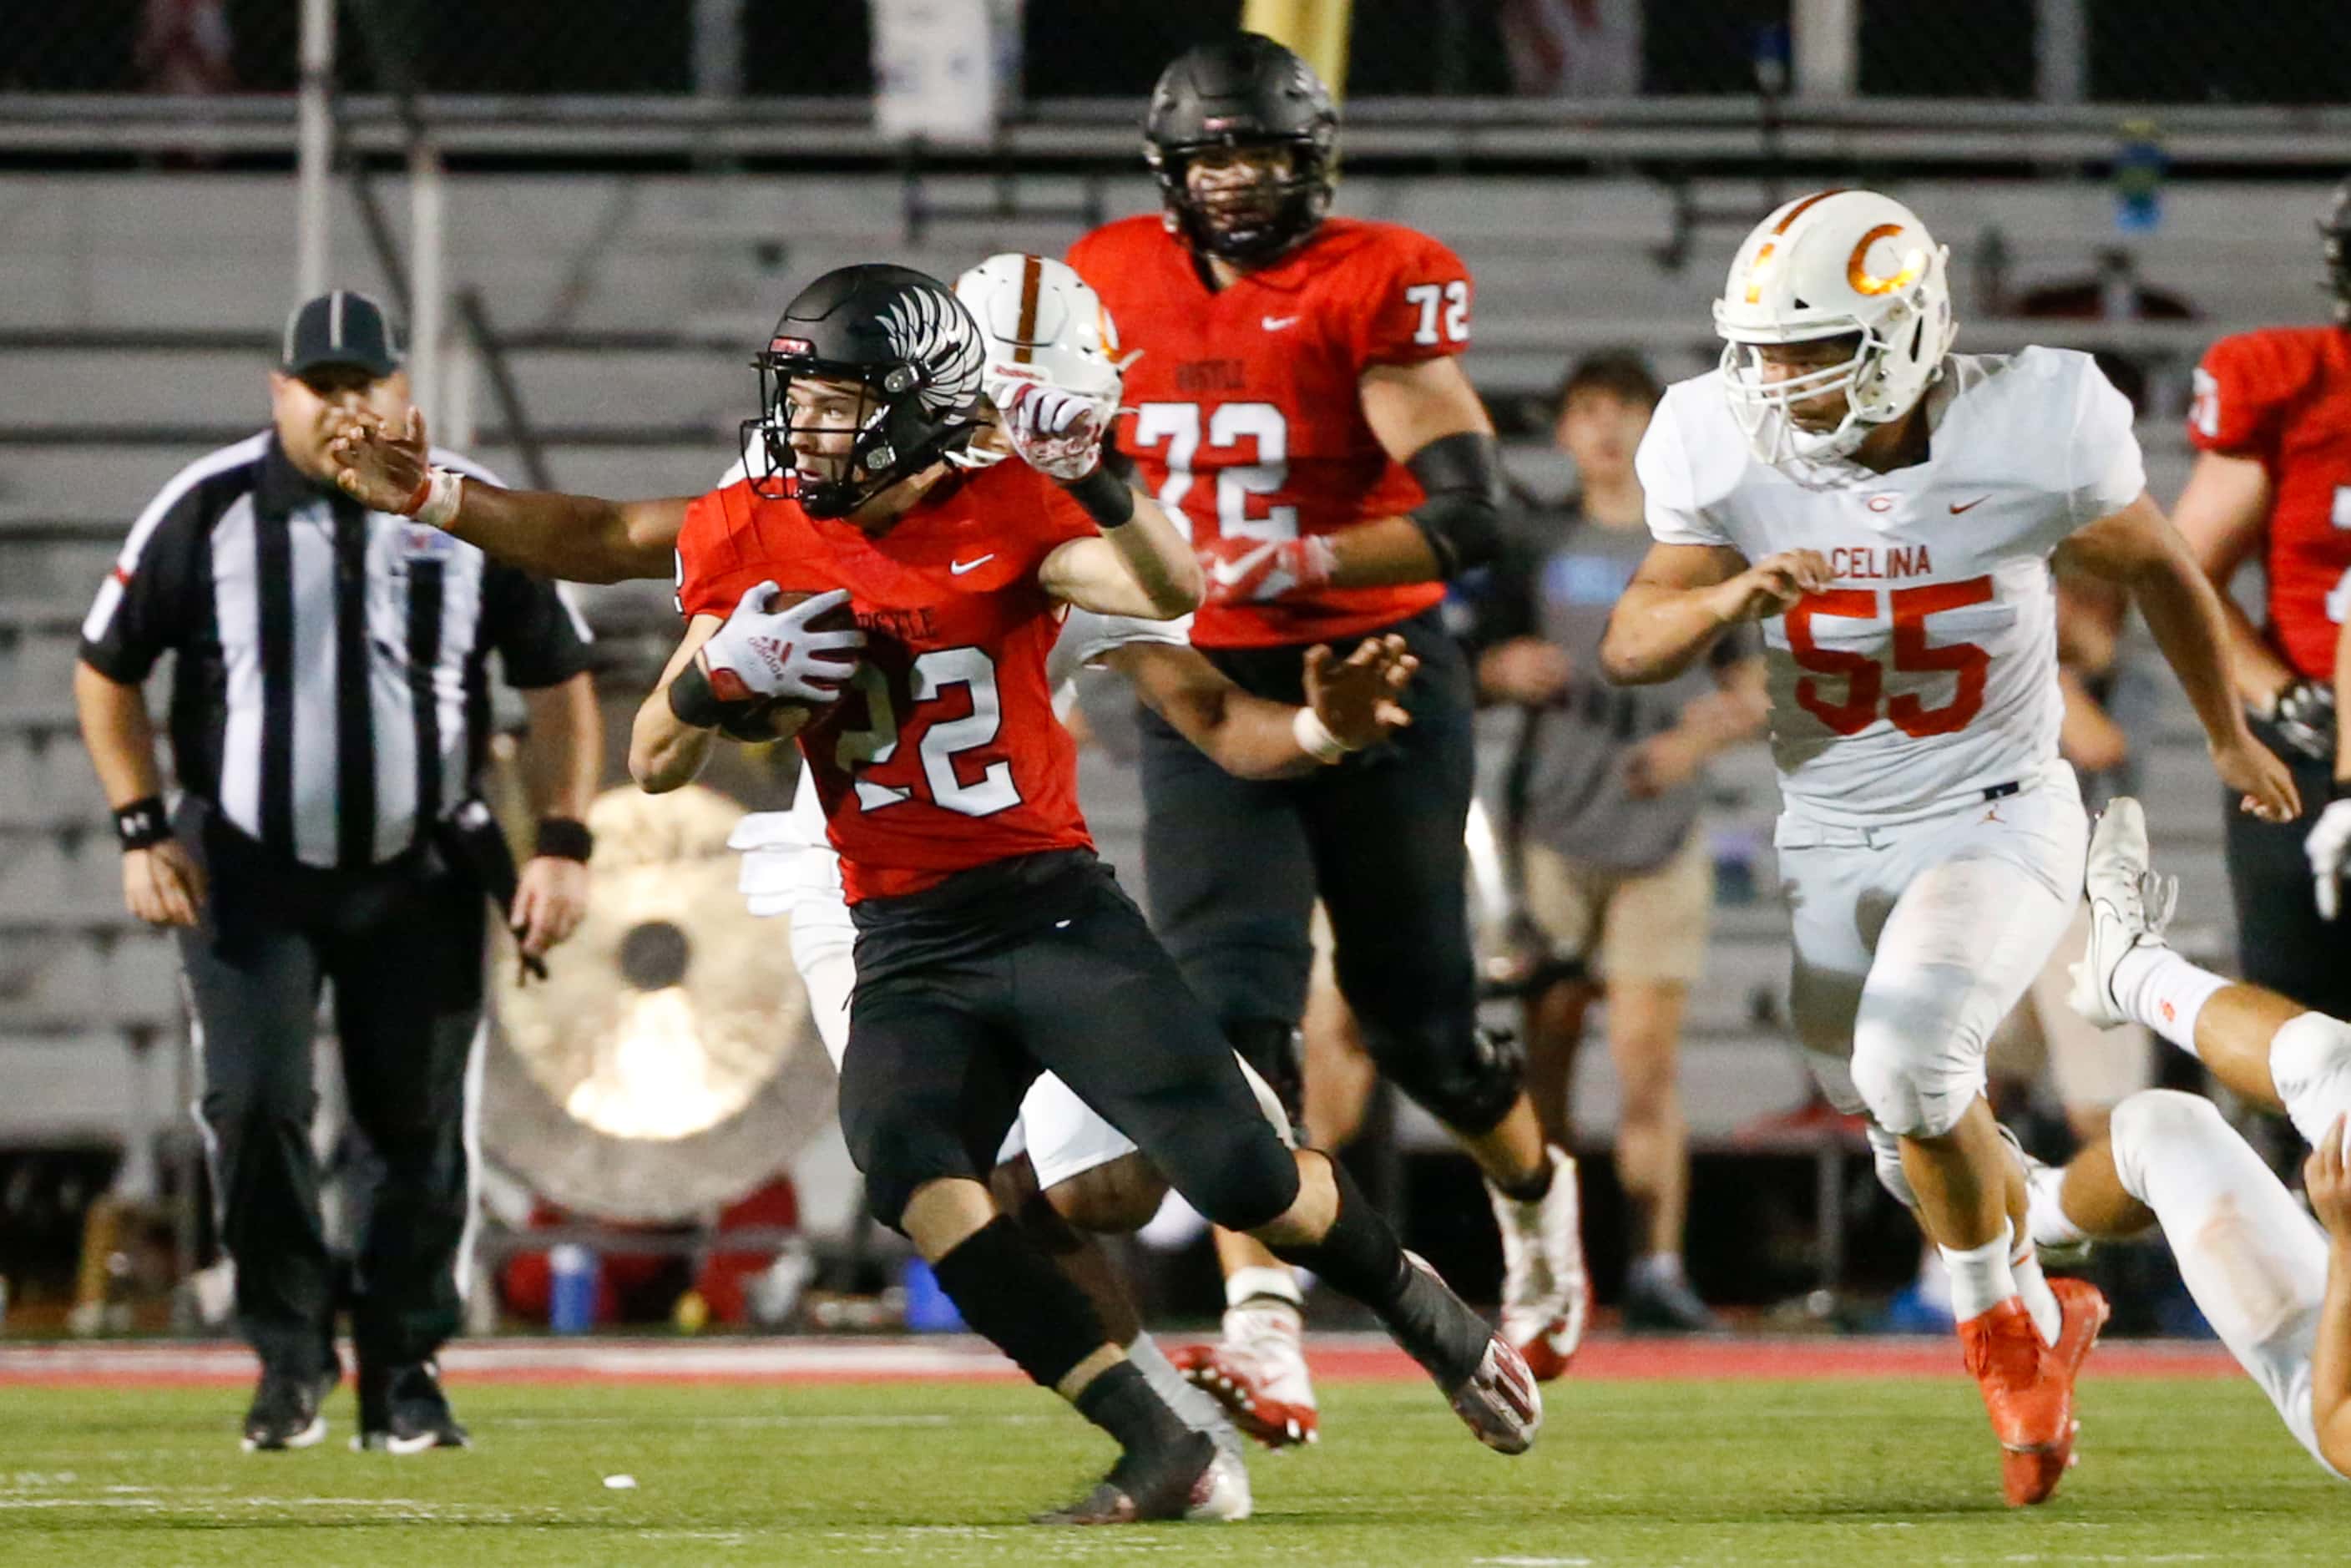 Argyle running back Dax Horany (22) runs past Celina defensive lineman William Pace (55)...